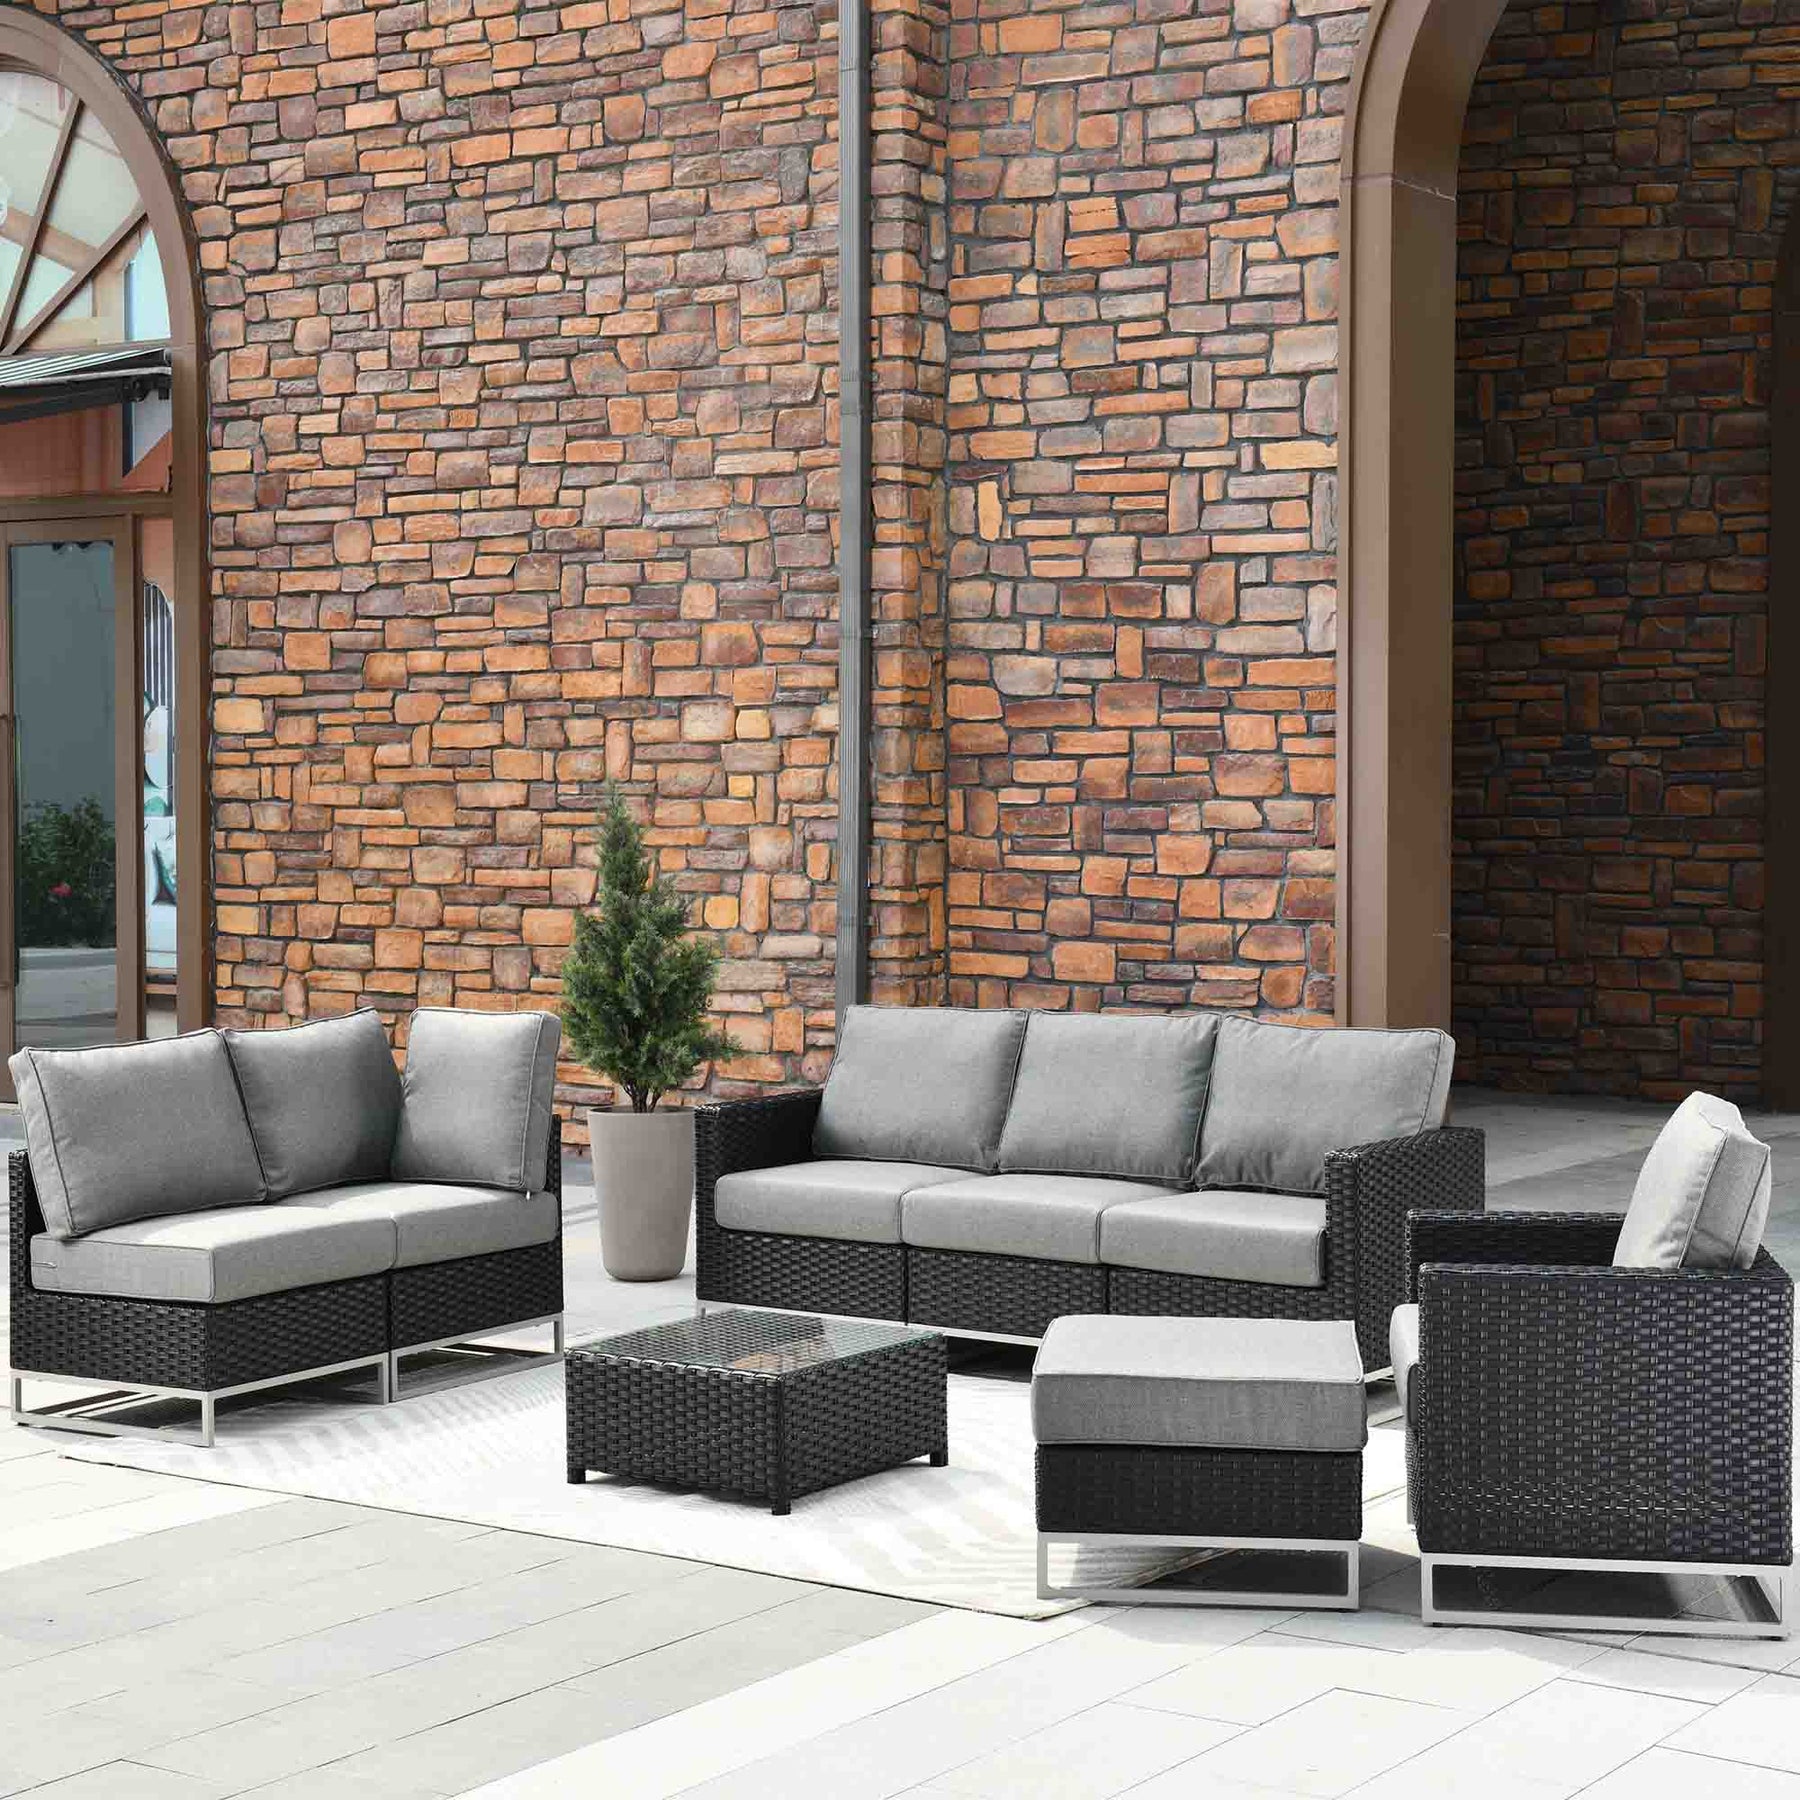 Ovios Patio Furniture Set 8-Piece with Black Wicker, No Assembly Required